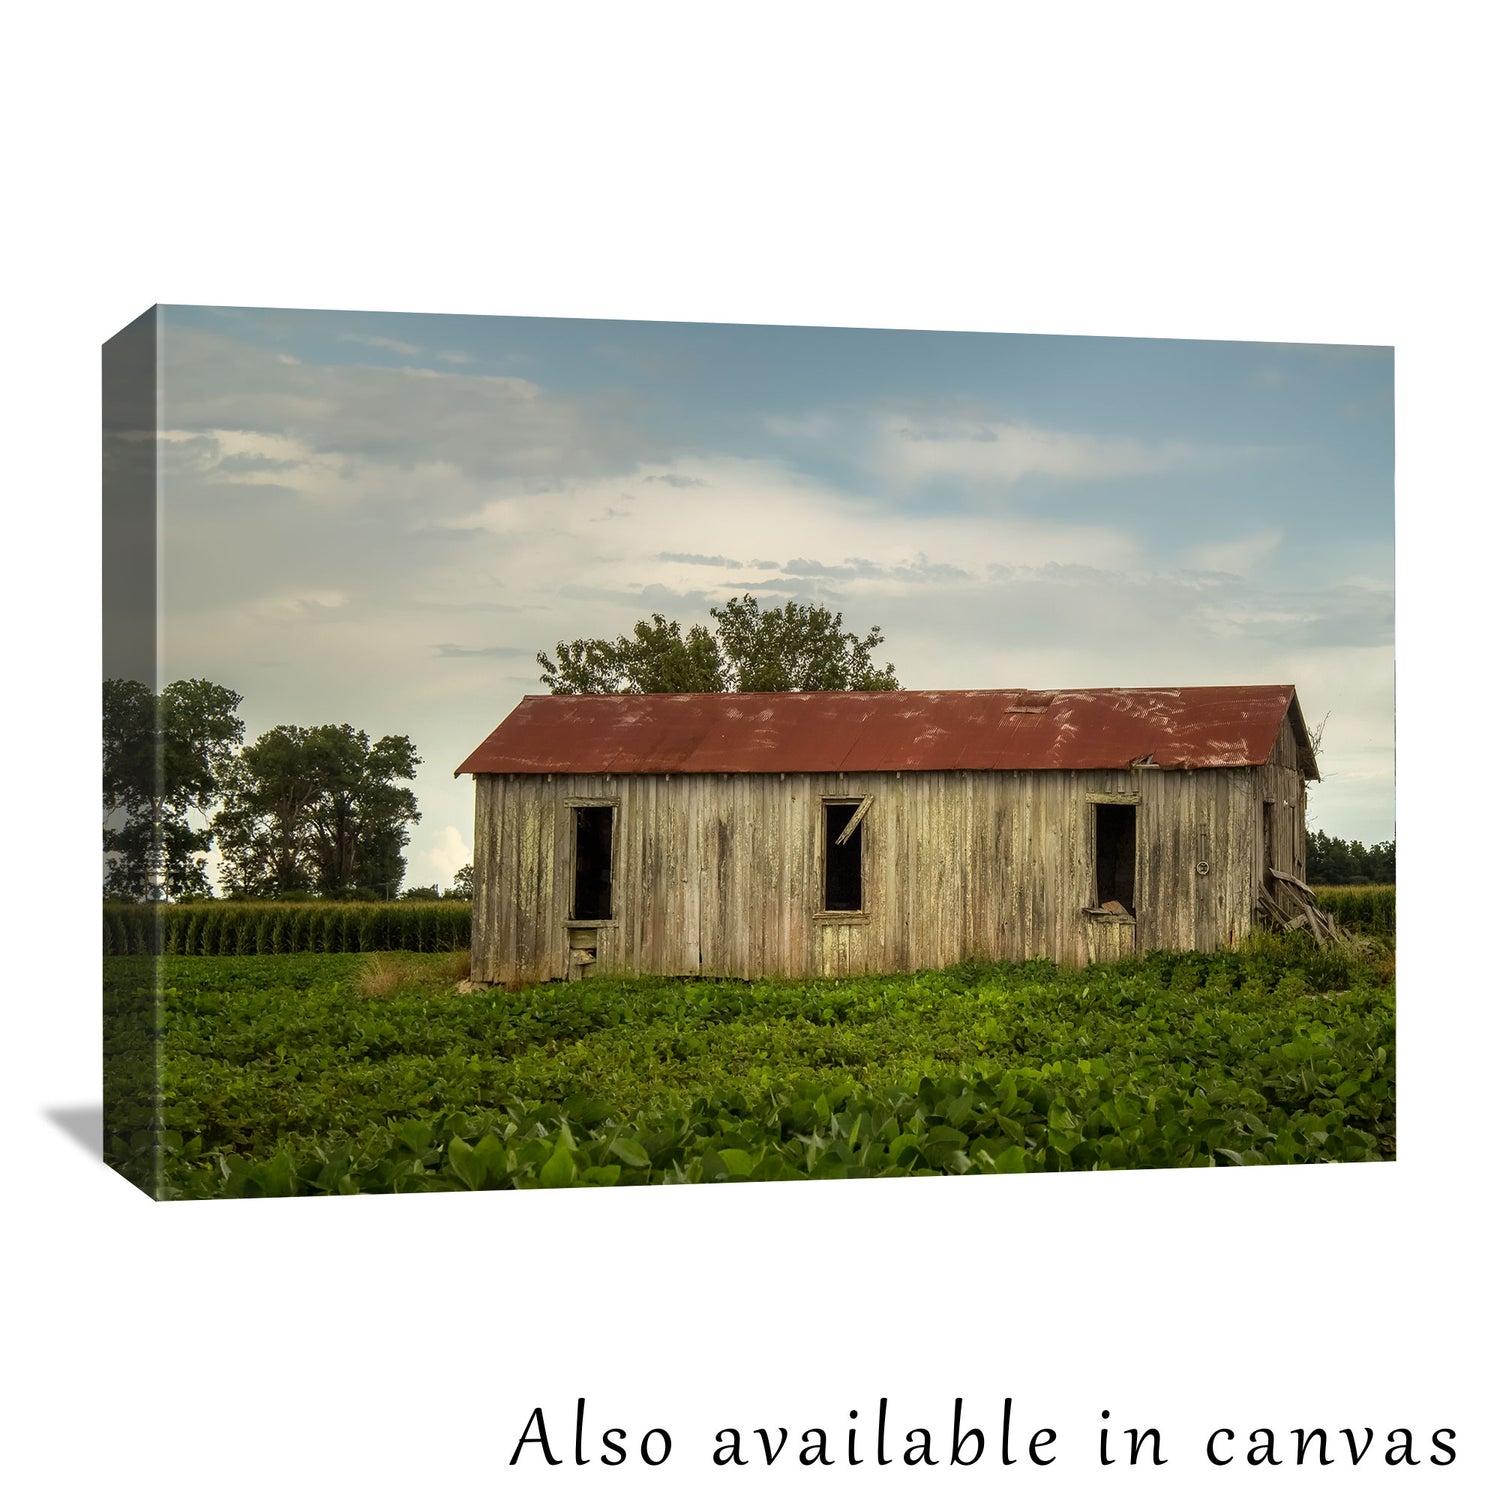 The architectural photograph is beautifully presented on a gallery-wrapped canvas, showing this photograph is also available as a canvas print for those interested in a ready-to-hang solution.